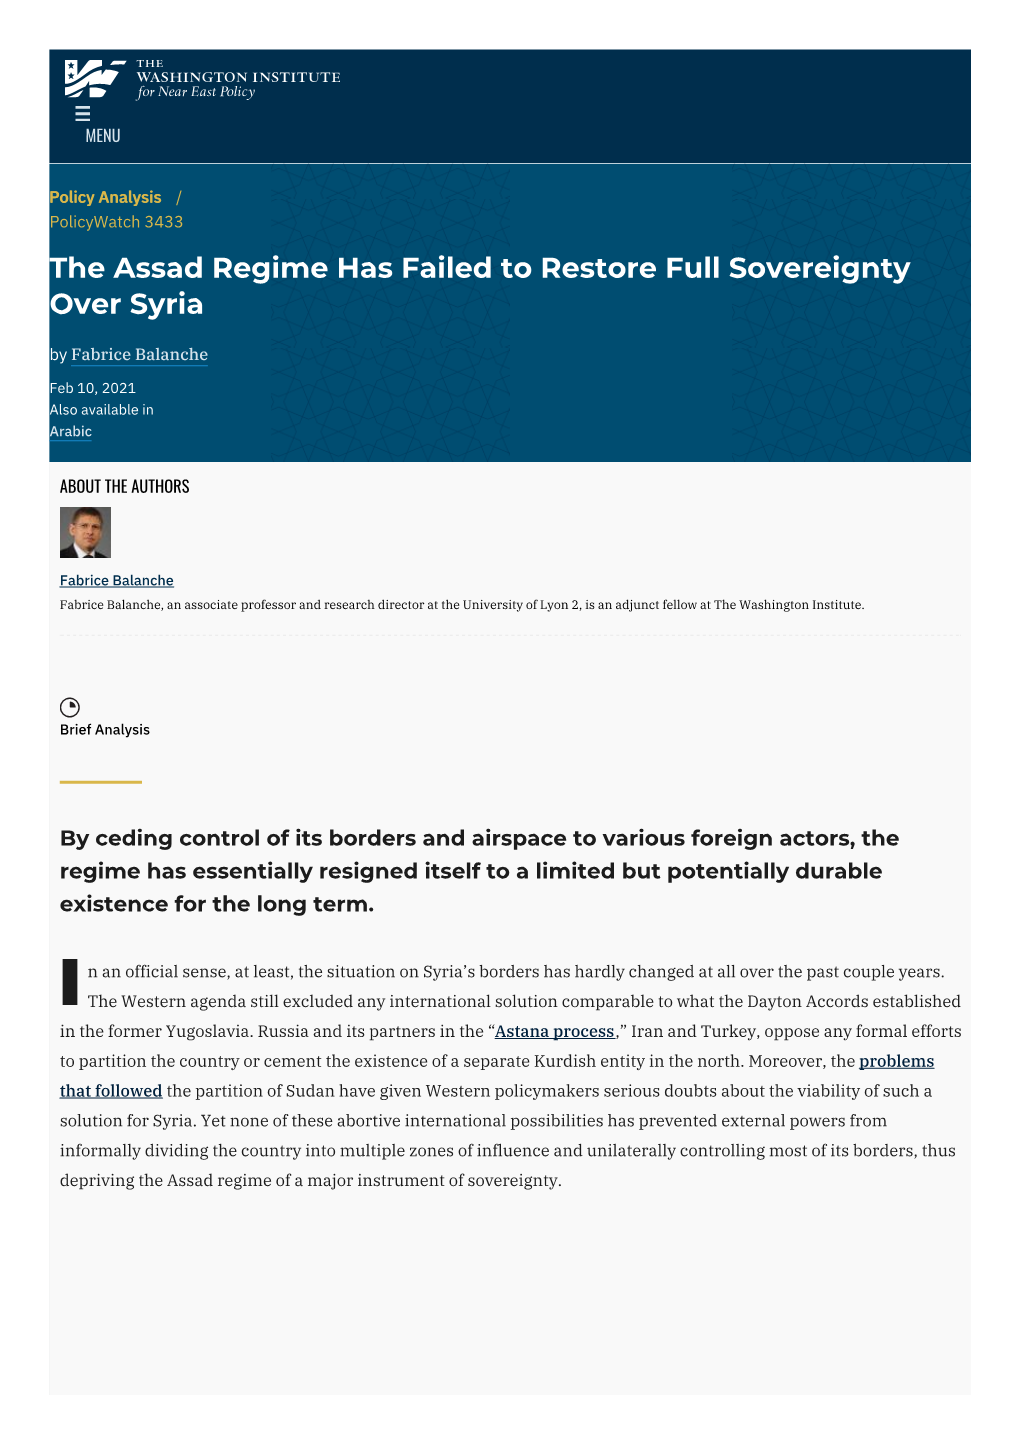 The Assad Regime Has Failed to Restore Full Sovereignty Over Syria by Fabrice Balanche